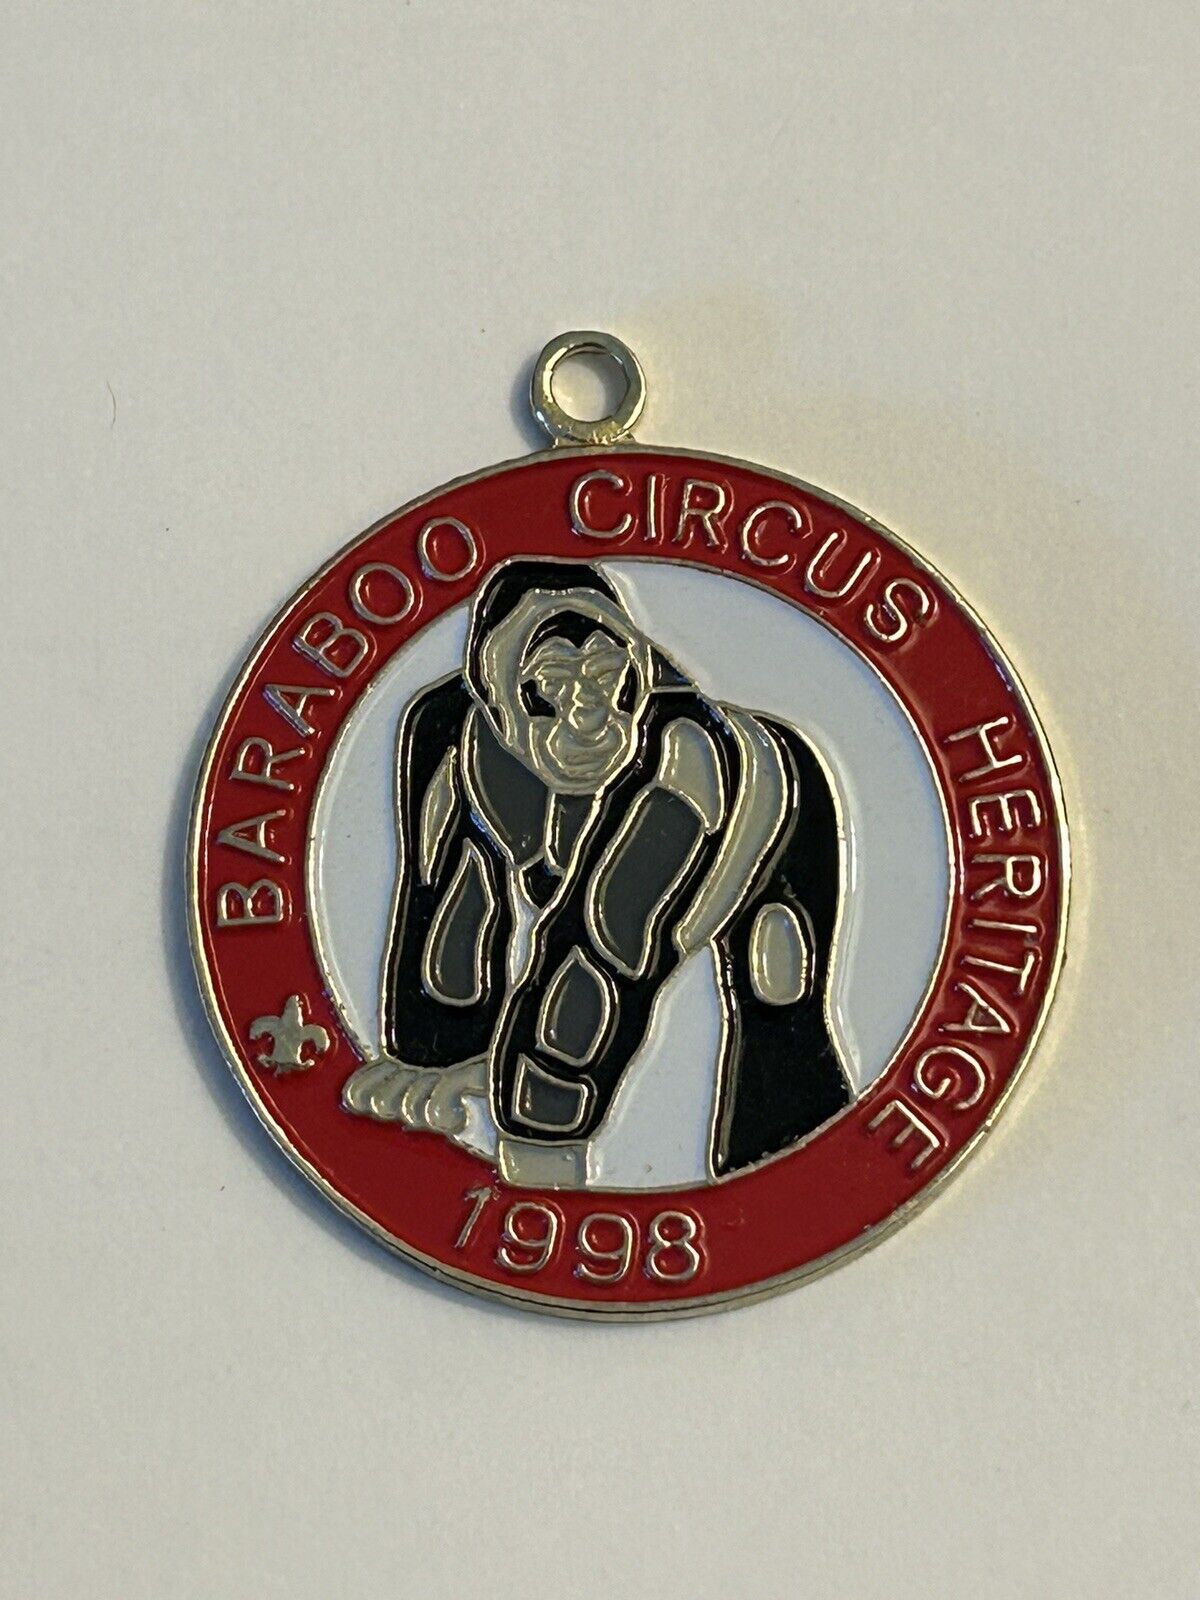 1998 Baraboo Circus Heritage Trail Medal Four Lakes Council Wisconsin Gorilla WI